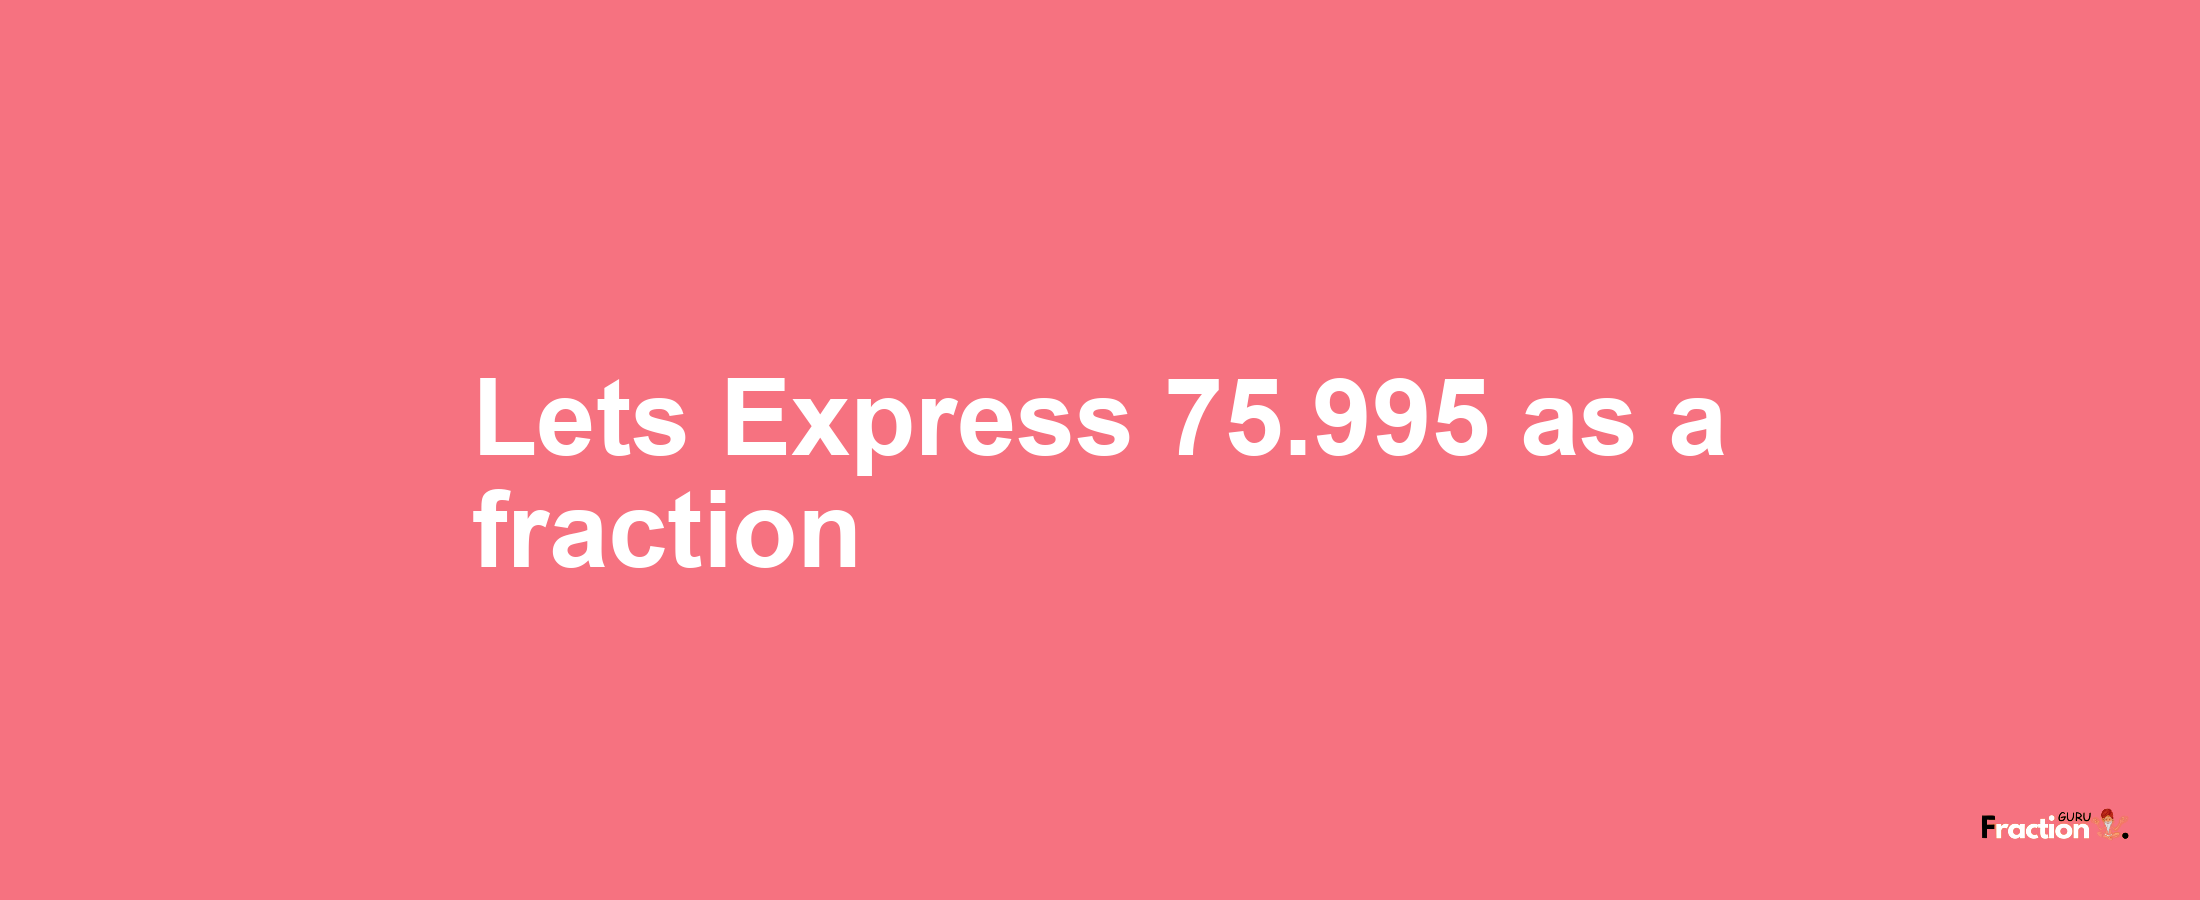 Lets Express 75.995 as afraction